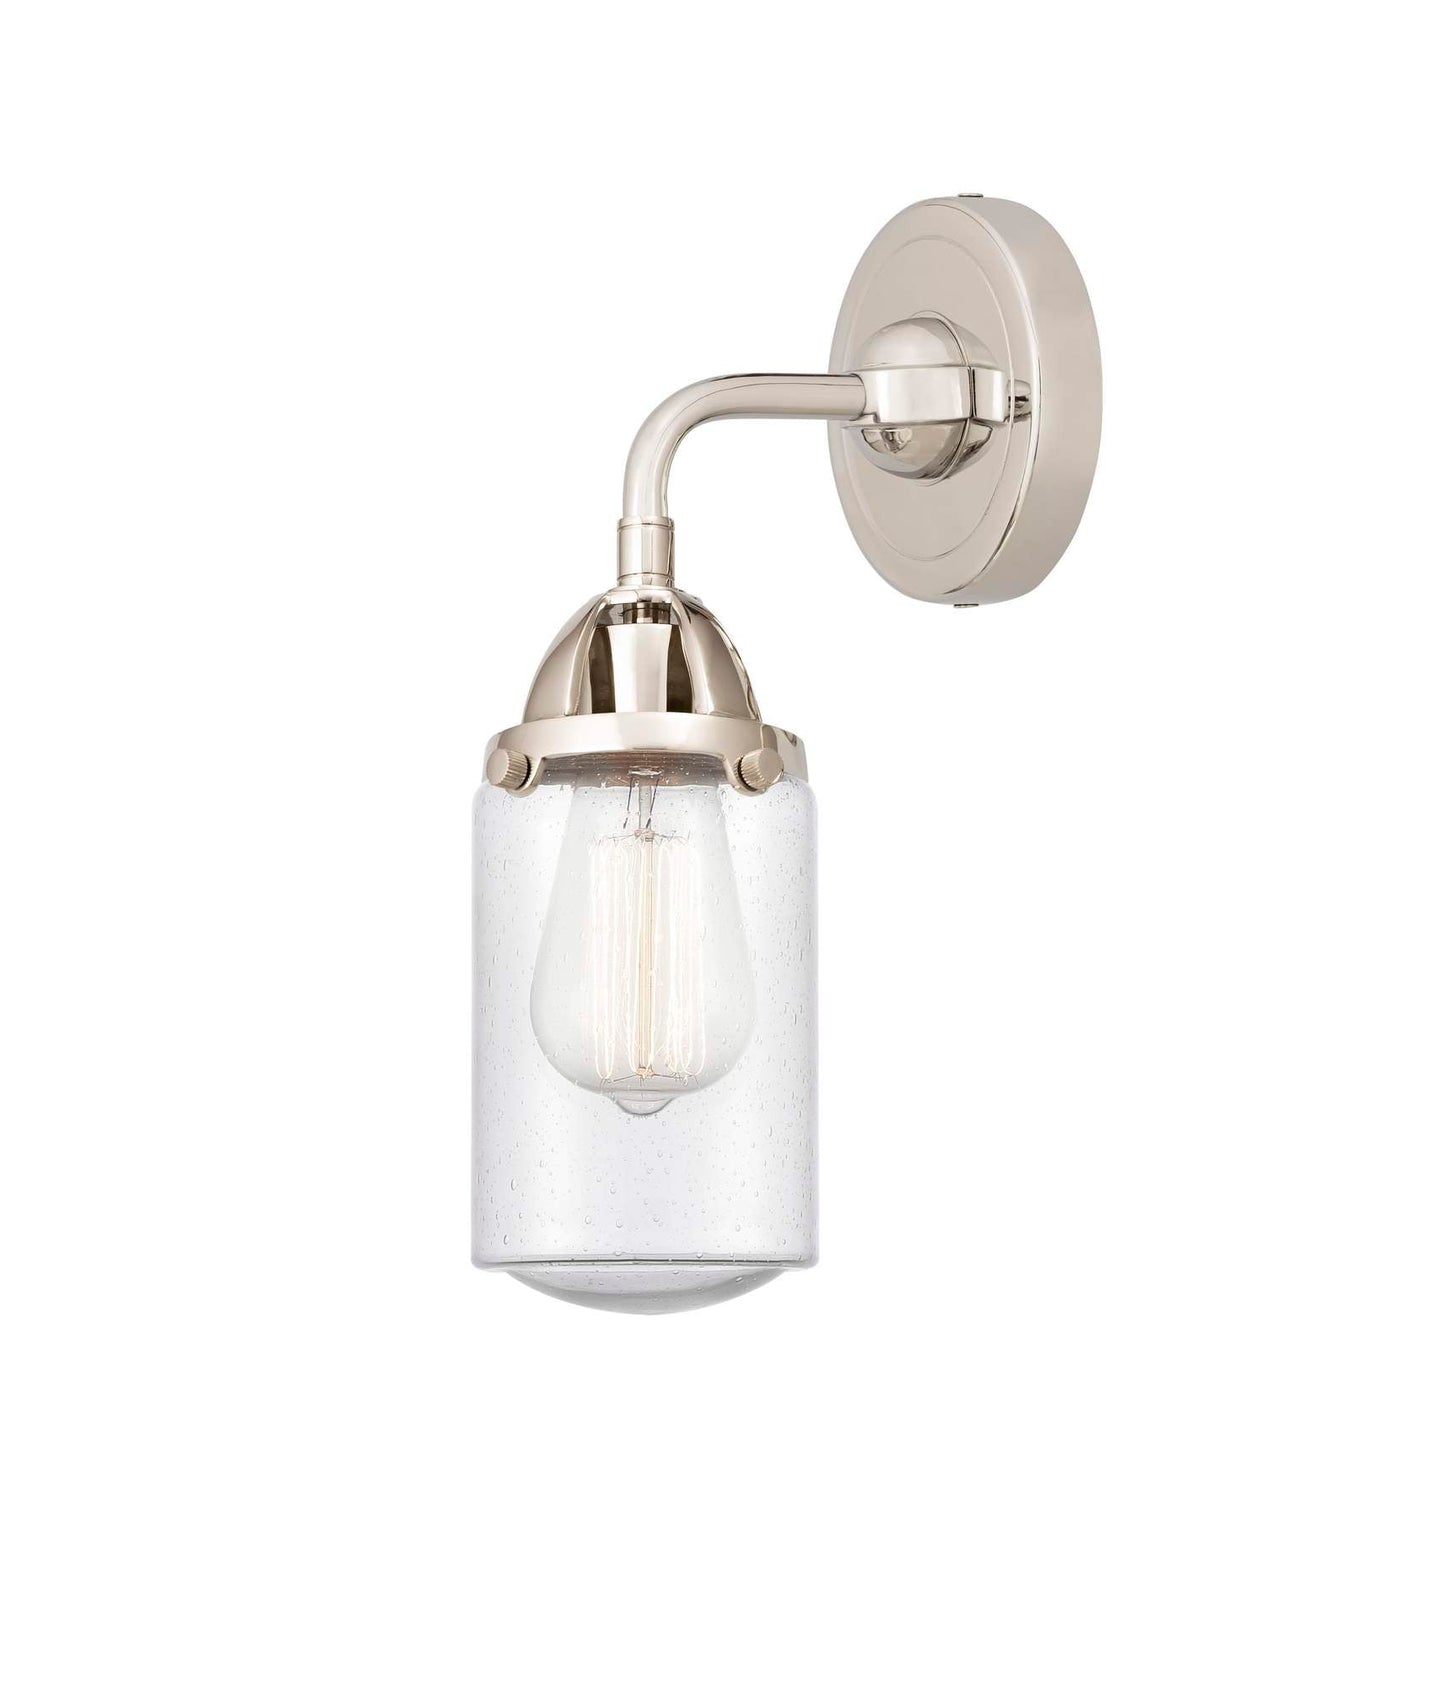 288-1W-PN-G314 1-Light 4.5" Polished Nickel Sconce - Seedy Dover Glass - LED Bulb - Dimmensions: 4.5 x 6.5 x 10.875 - Glass Up or Down: Yes